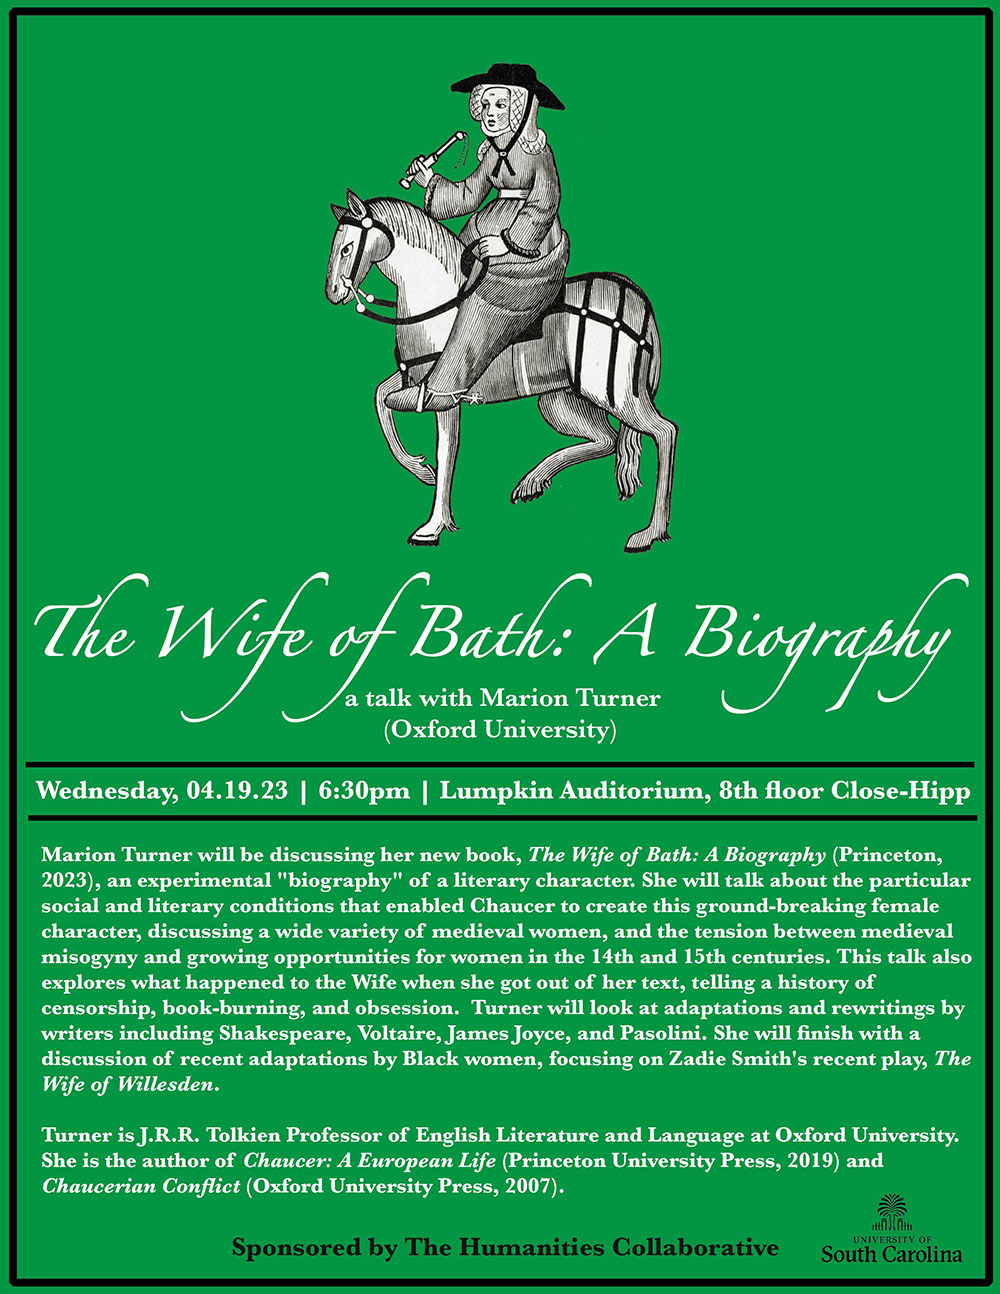 Image of Chaucer's Wife of Bath at top of flyer, event details in paragraph on bottom